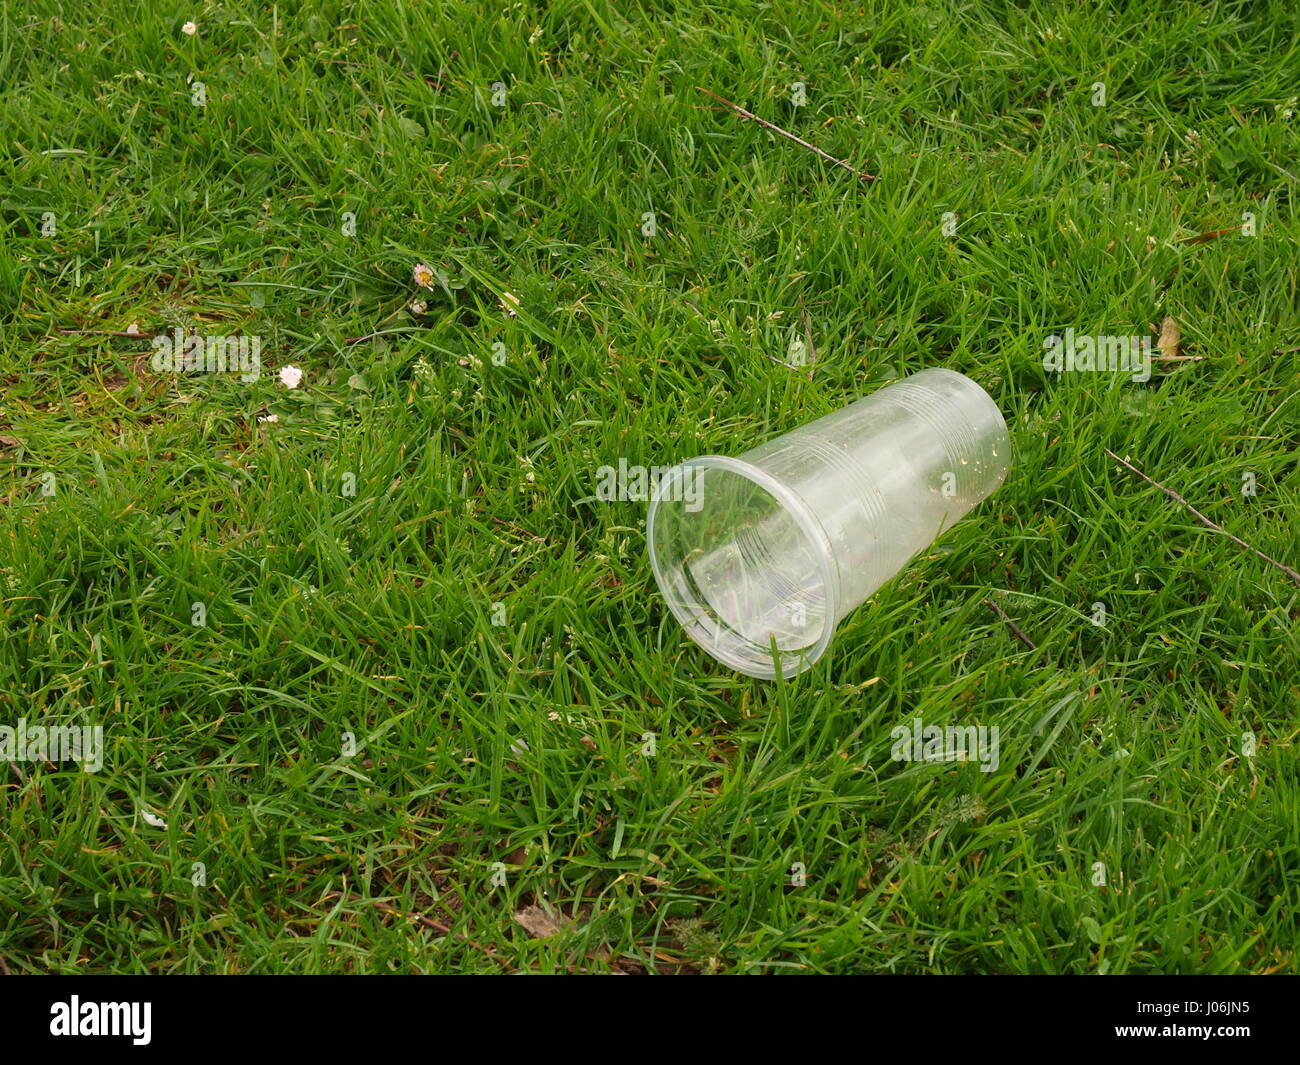 plastic glass discarded on grass, Stock Photo